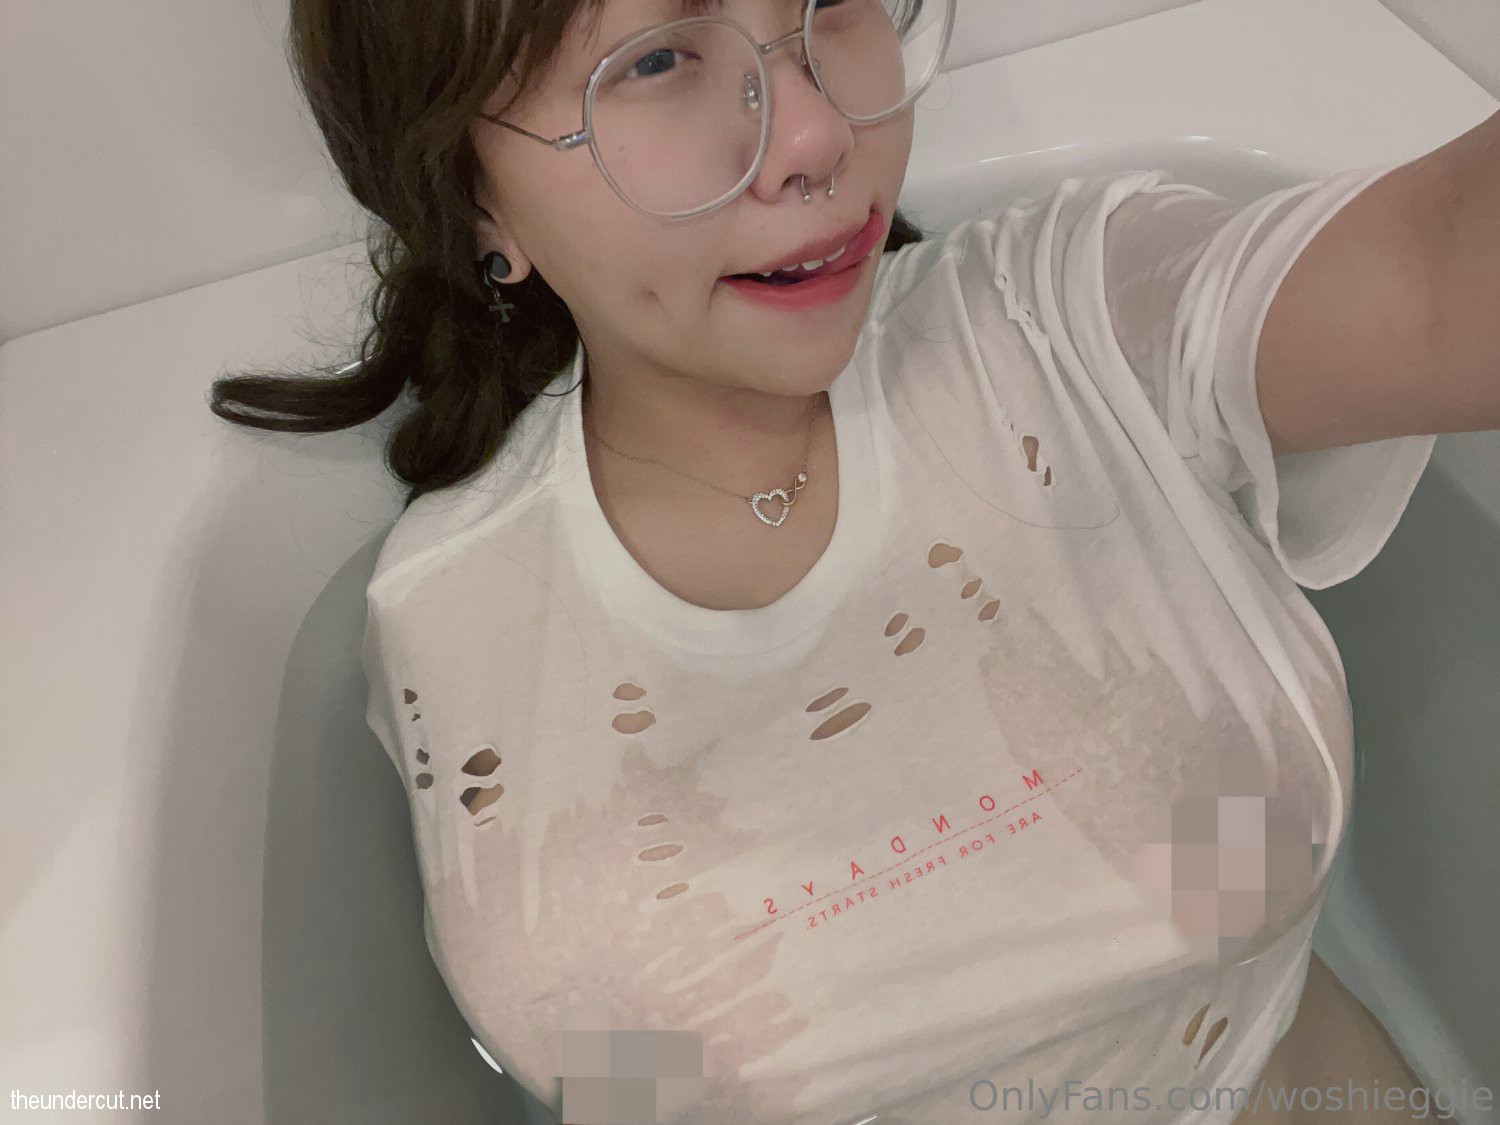 Eggies Onlyfans Woshieggie Nude Leaked 008